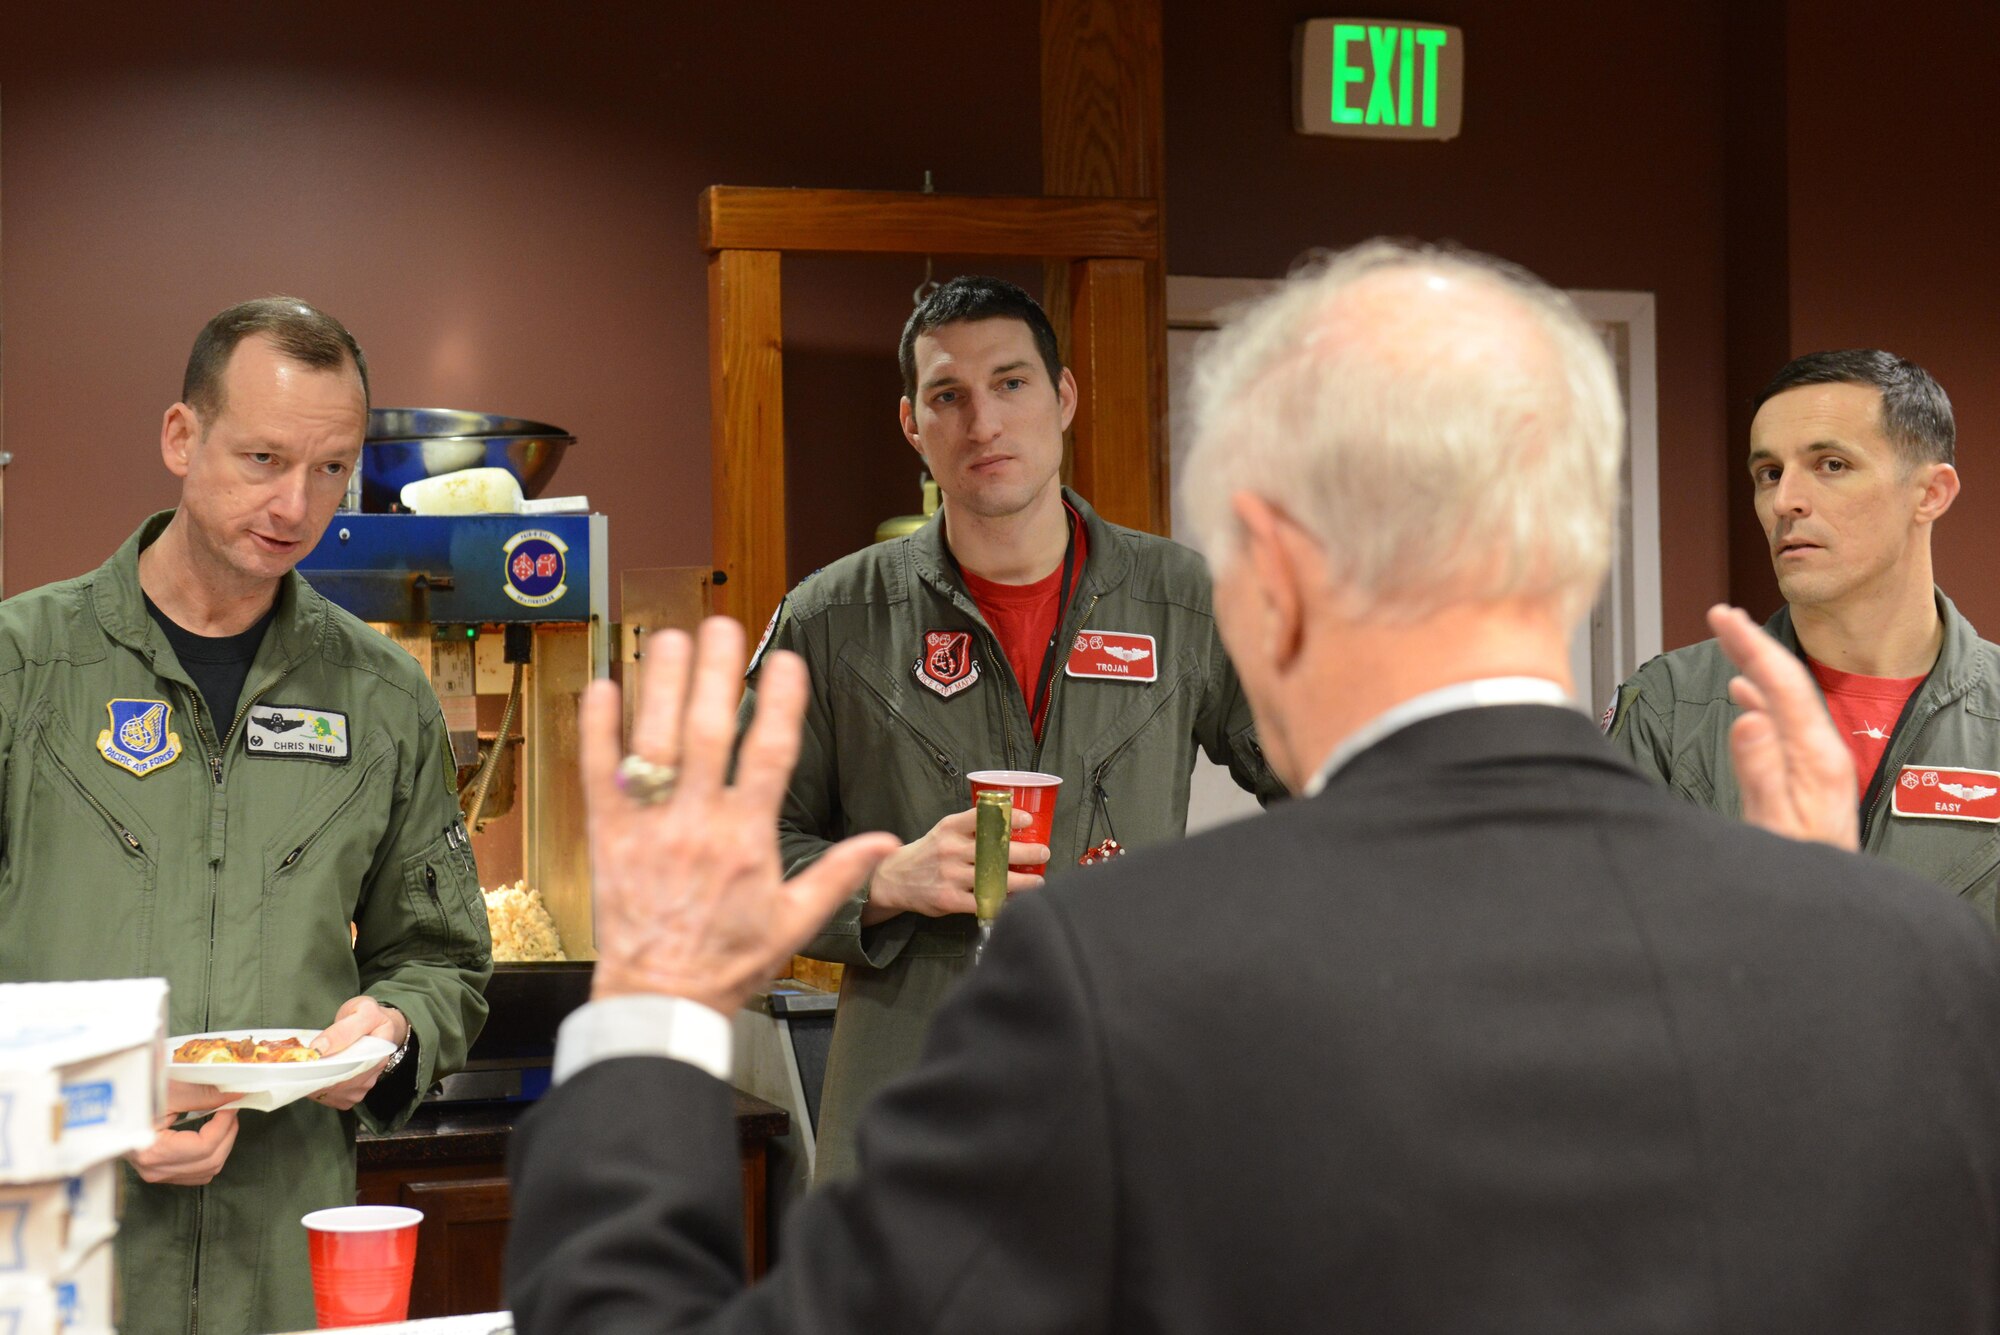 Donald W. Sheppard, a retired Air Force Major General, speaks to Air Force Col. Christopher Niemi, 3rd Wing commander, and other pilots at the 90th Fighter Squadron at Joint Base Elmendorf-Richardson, Alaska, Jan. 20, 2017. Sheppard, a pilot with more than 5,000 flying hours, and 247 combat missions during the Vietnam War, spoke about his experiences in the Air Force and provided insight into how the military can keep improving.